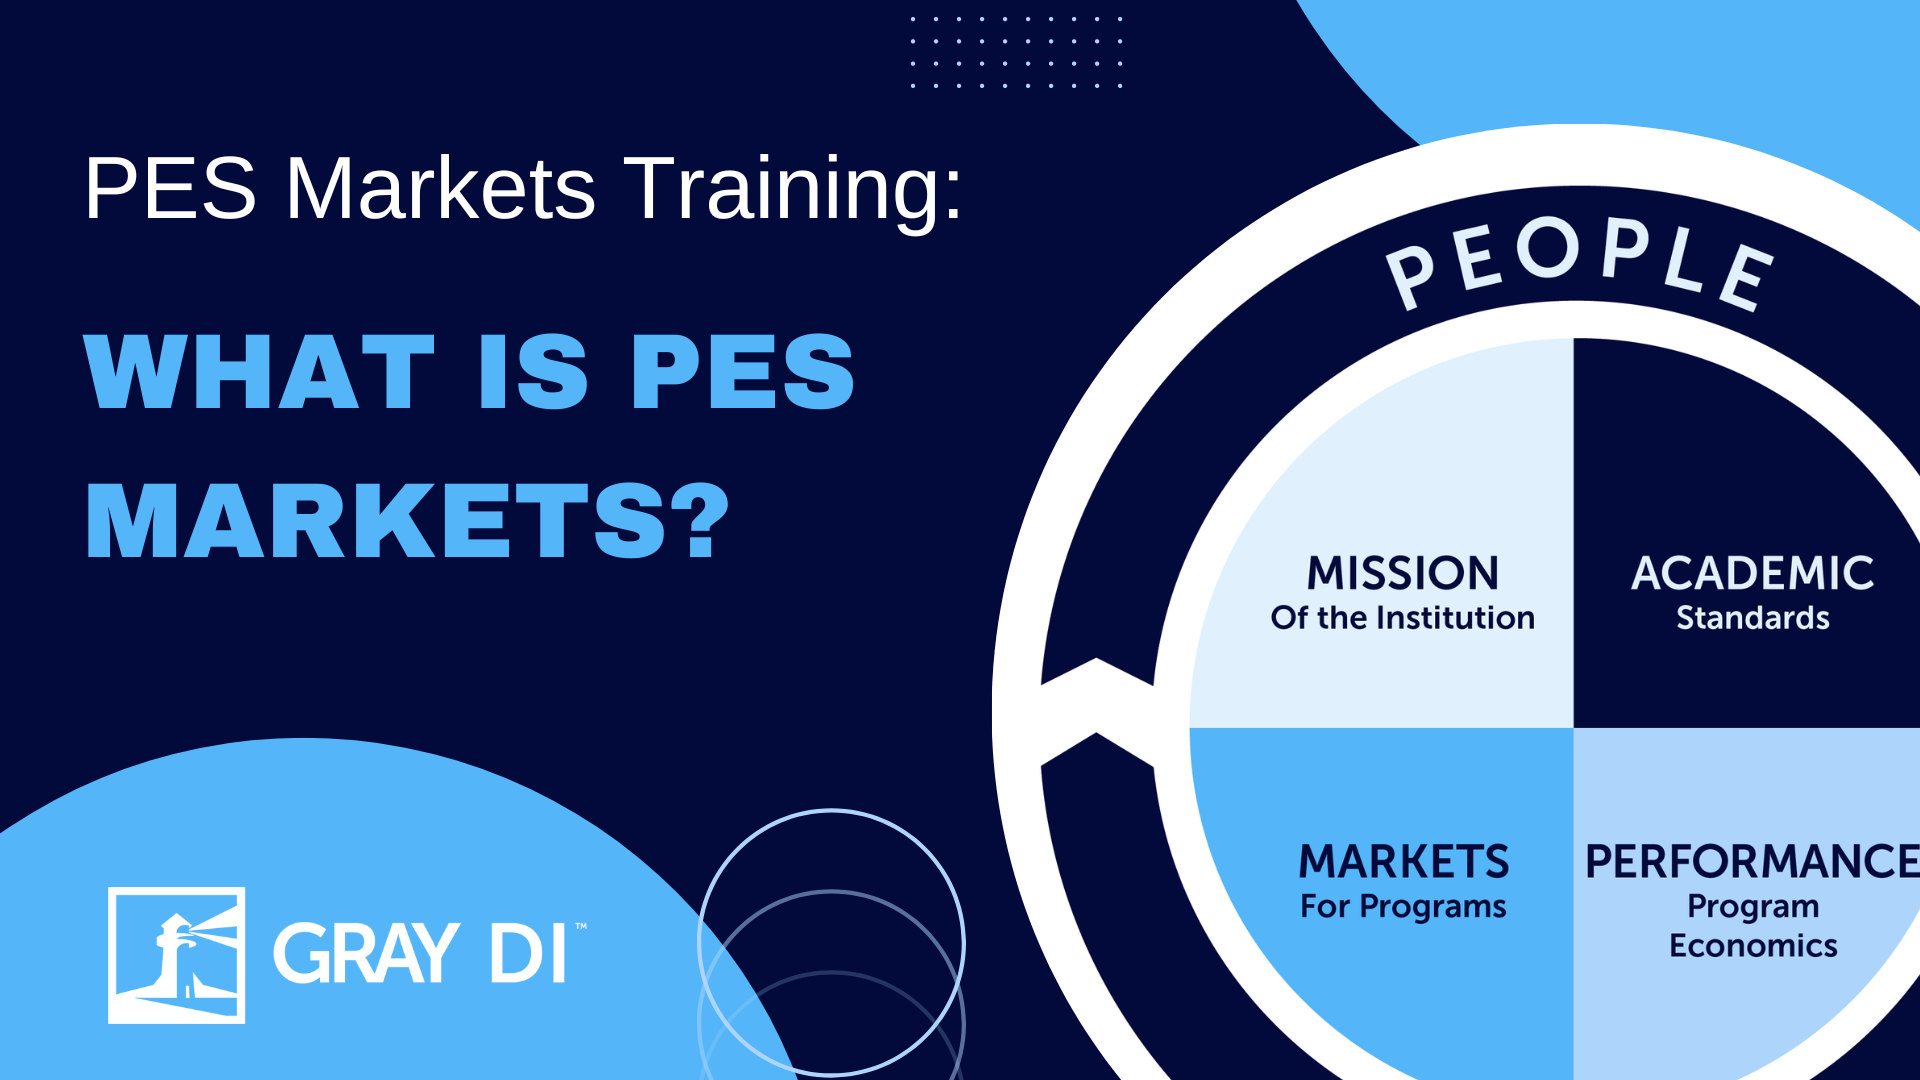 What Is PES Markets?